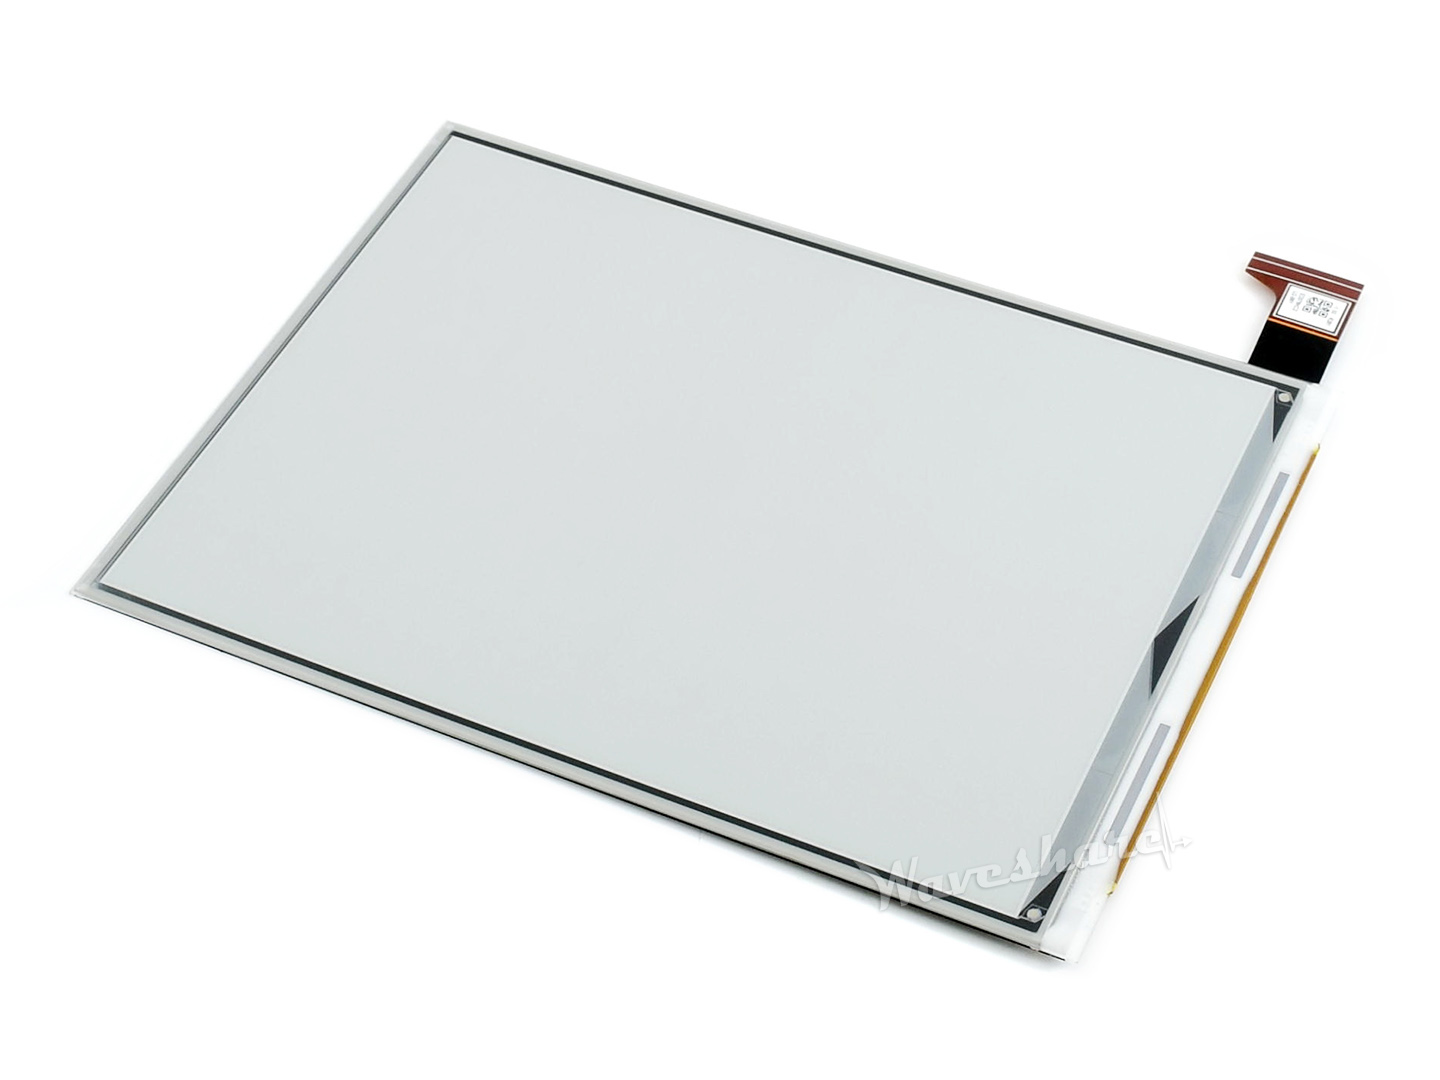 1872*1404, 7.8inch E-Ink display HAT for Raspberry Pi